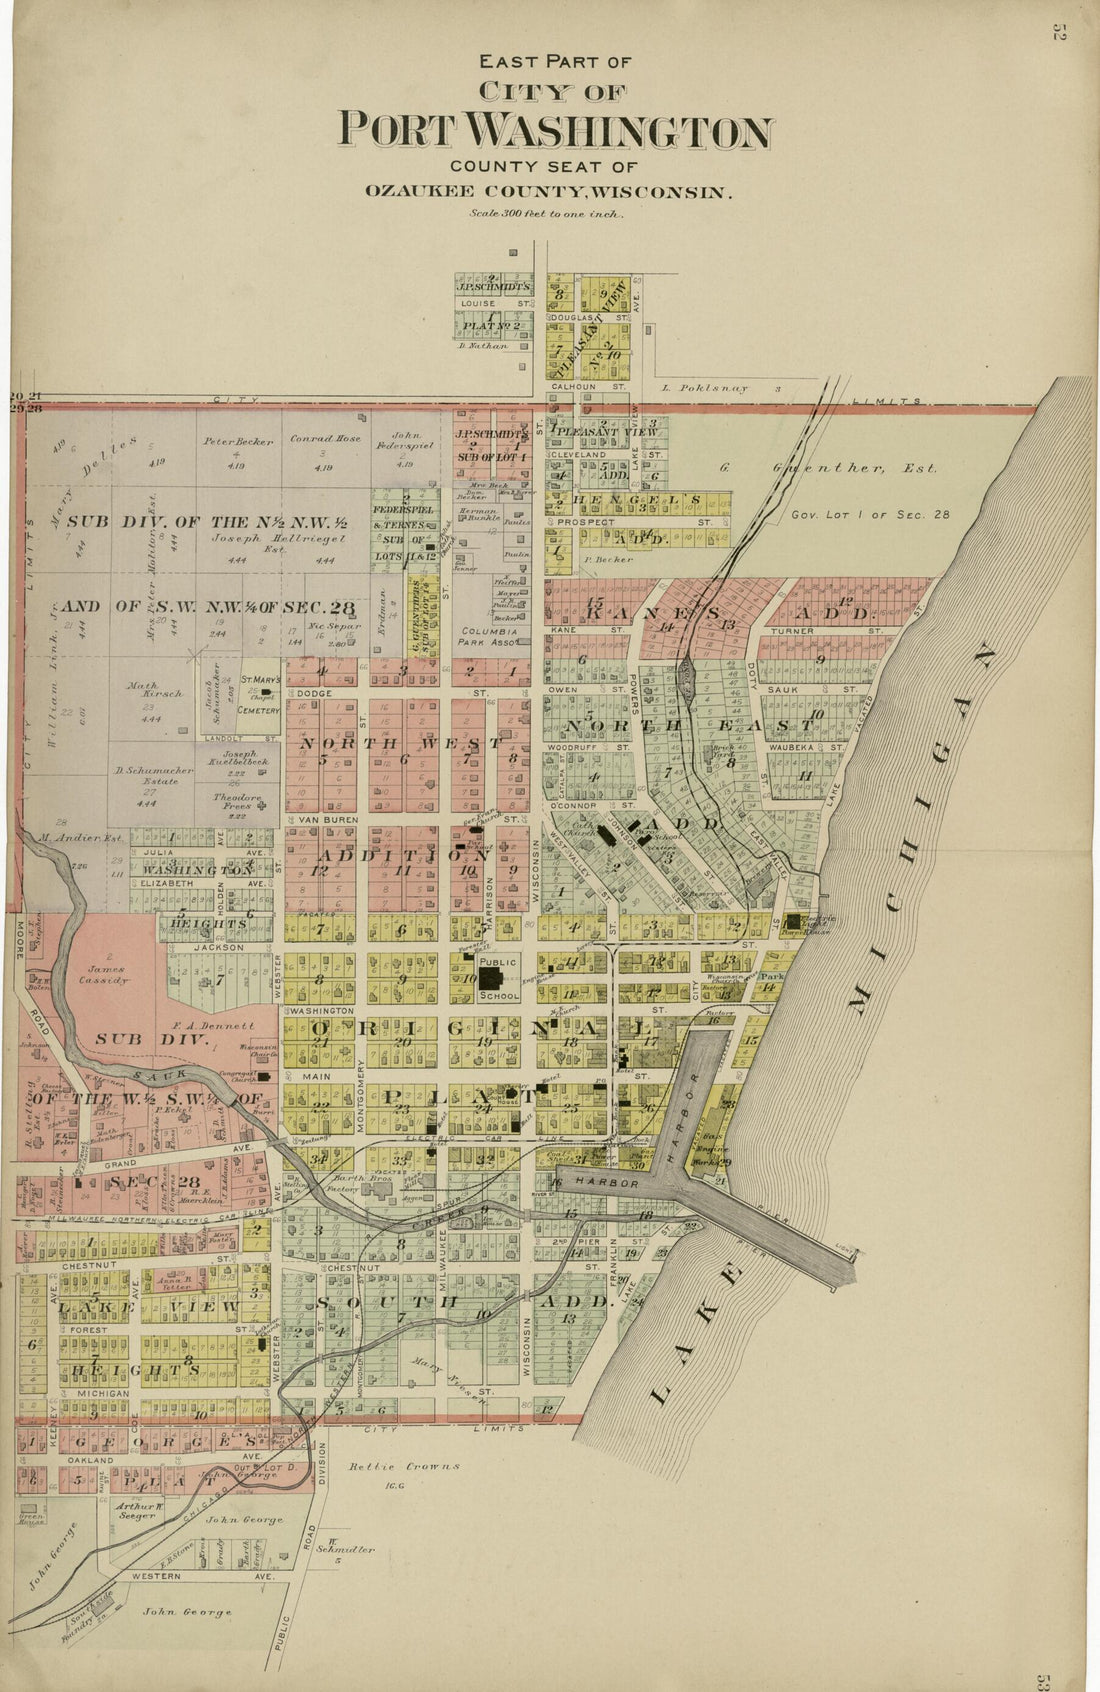 This old map of East Part: City of Port Washington from Plat Book of Washington and Ozaukee Counties, Wisconsin from 1915 was created by Albert Volk in 1915